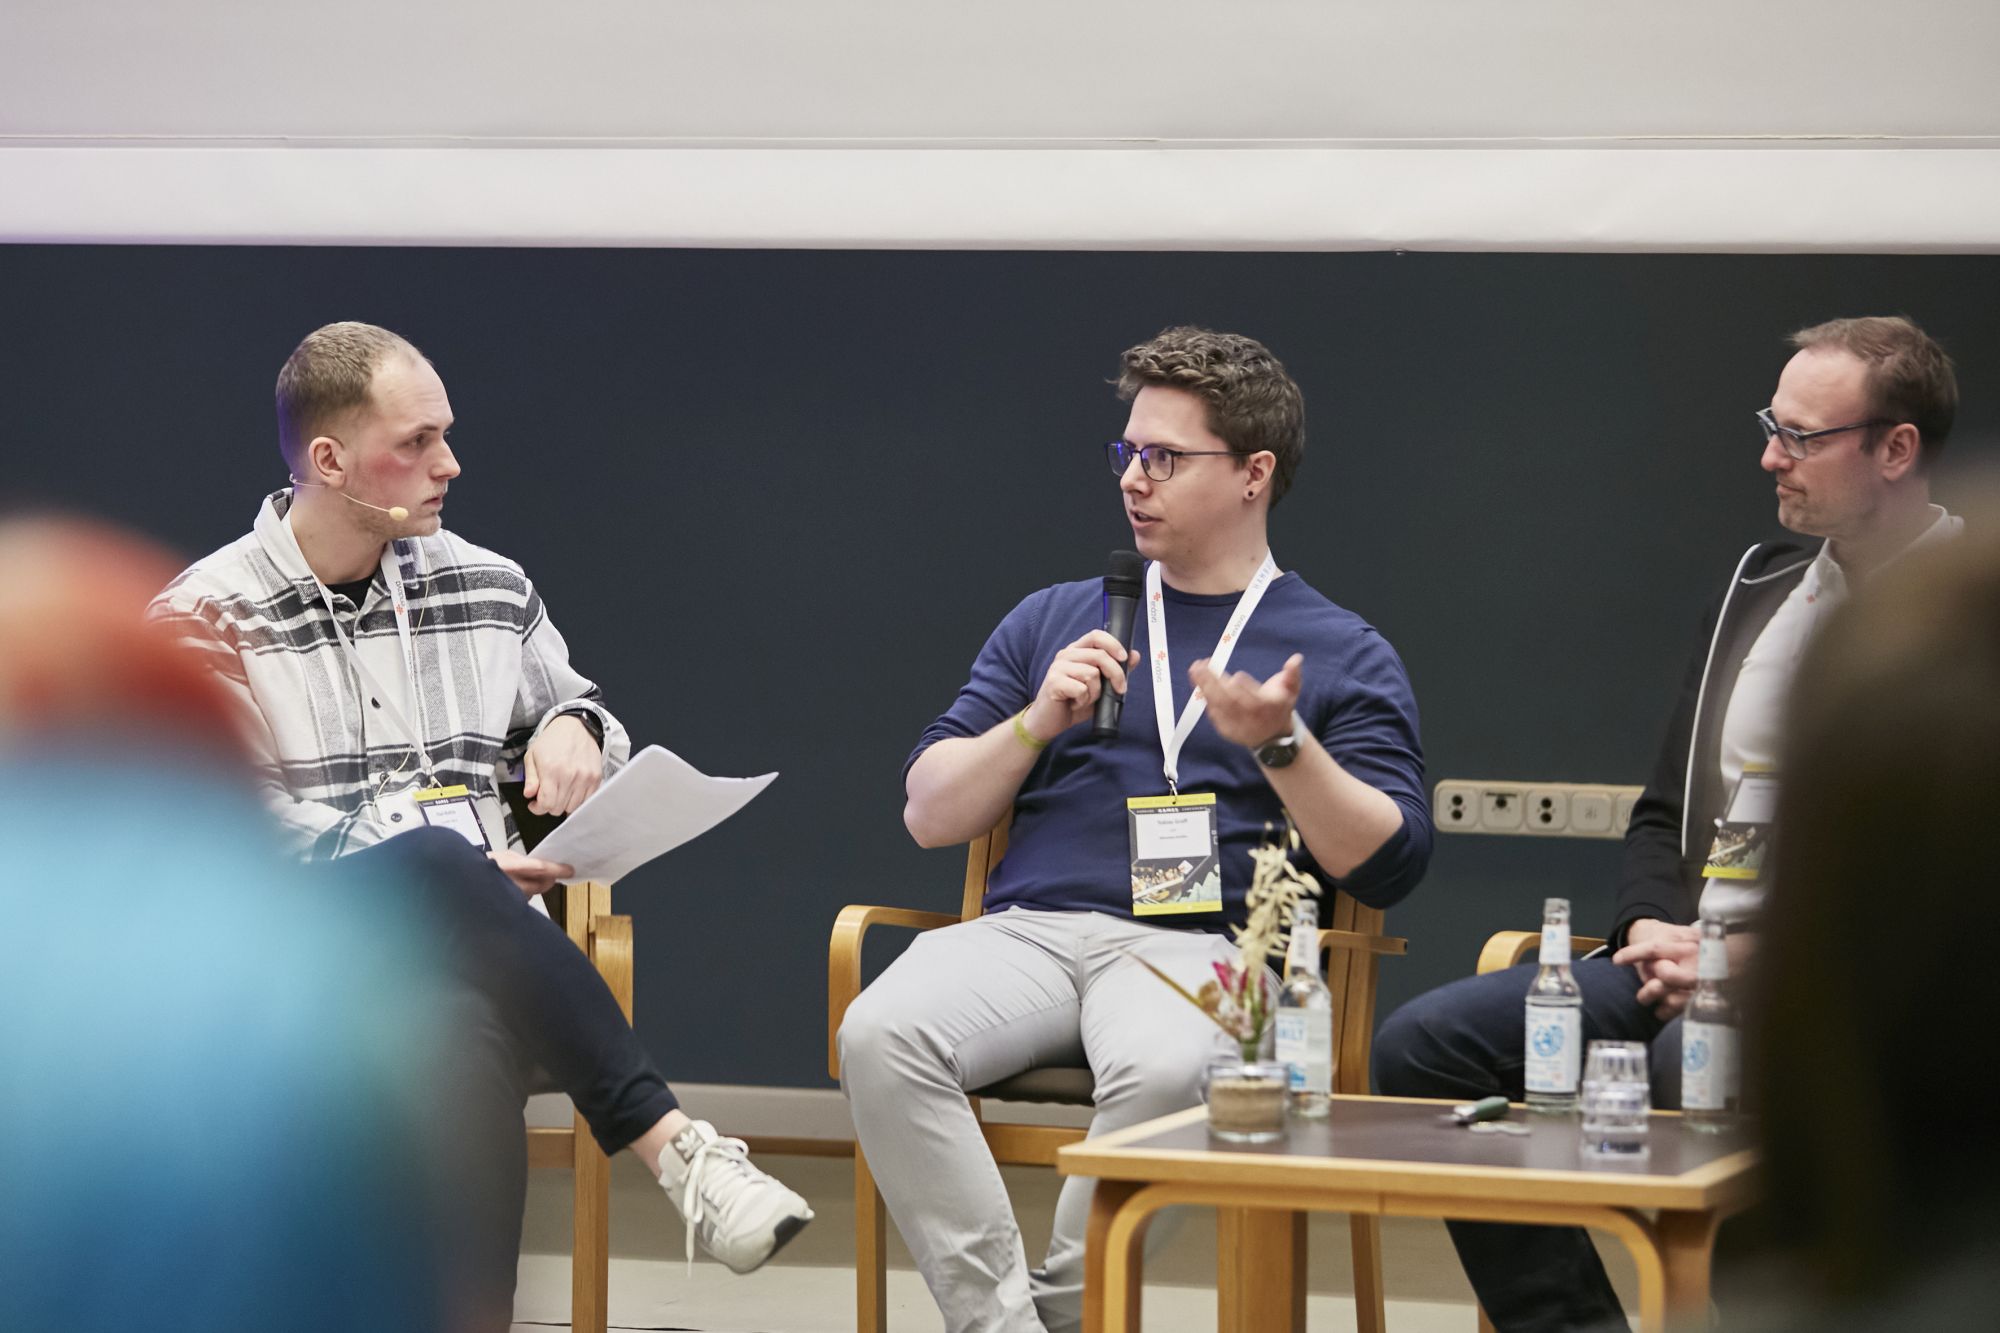 Sönke Menges (DLR), Tobias Graff (Mooneye Studios) and Michael Schade (Rockfish Games) discussing about the federal games funding | Photo by Rolf Otzipka